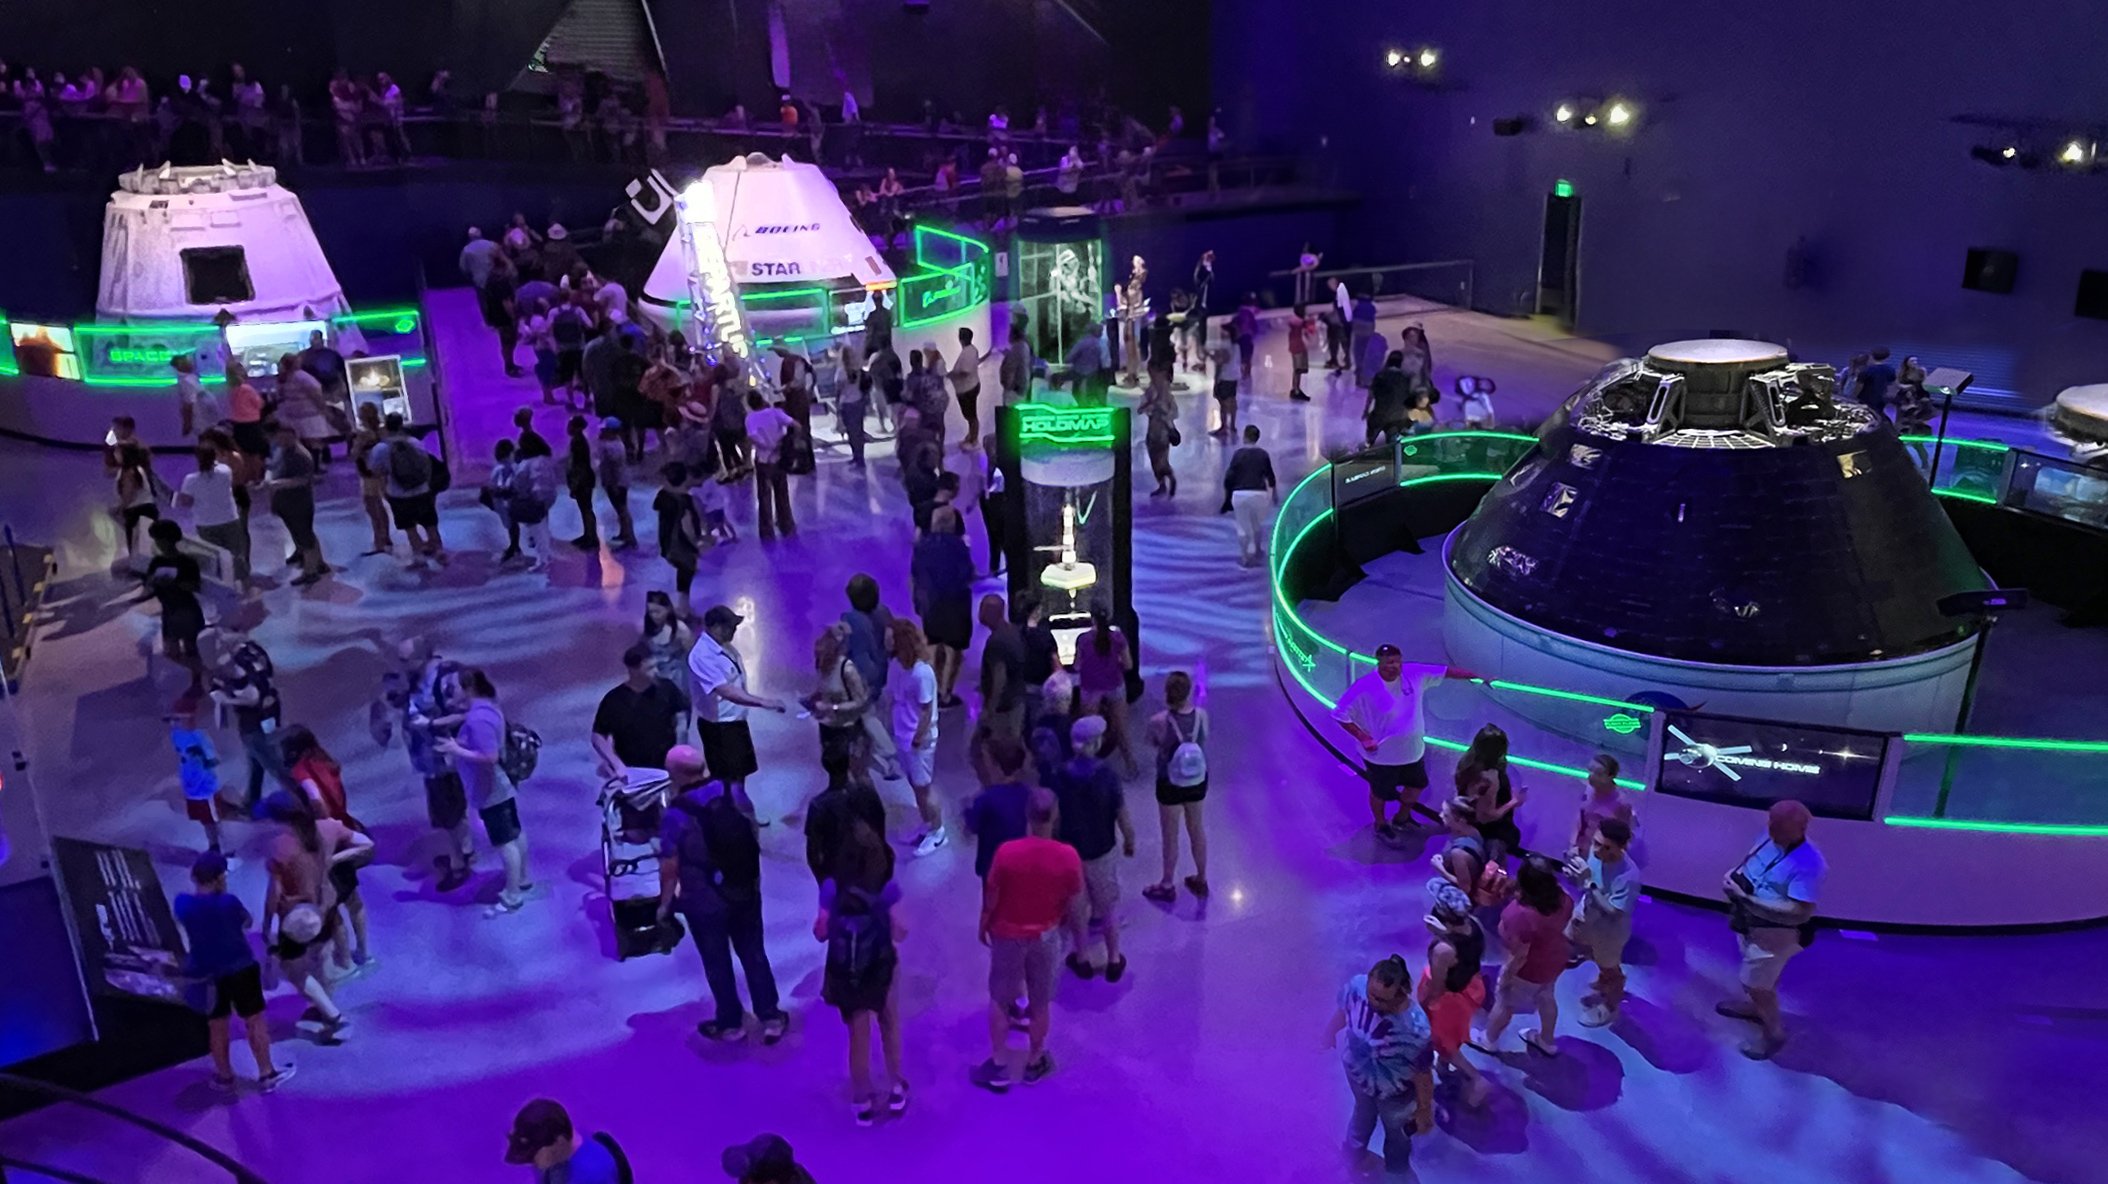    Exhibitry's expertise is on full display at the Kennedy Space Center in this sweeping view of several interactive experiences we created.   